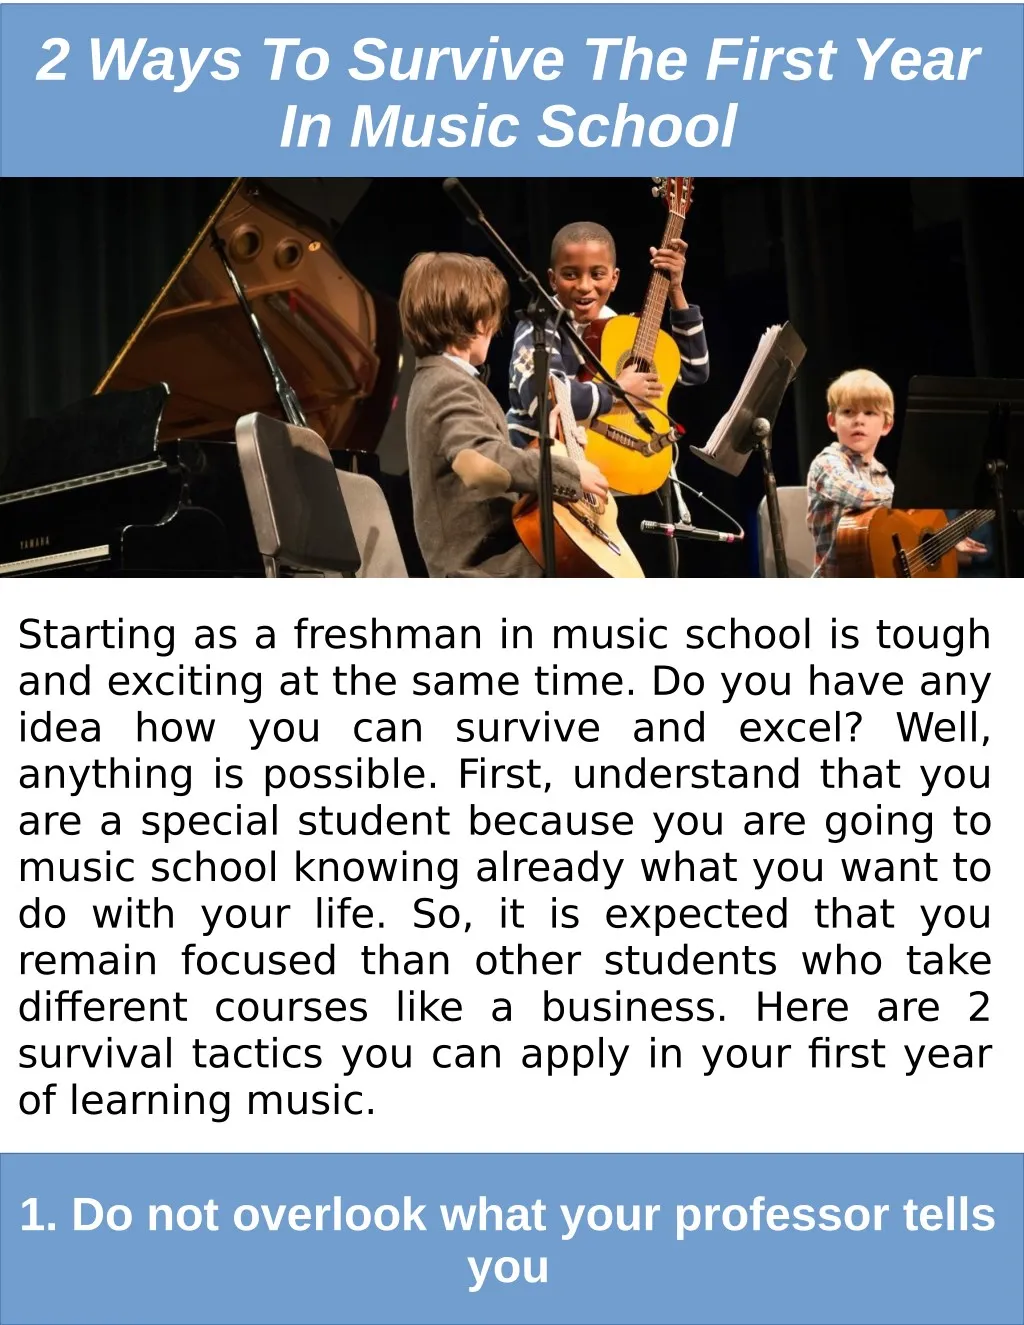 2 ways to survive the first year in music school